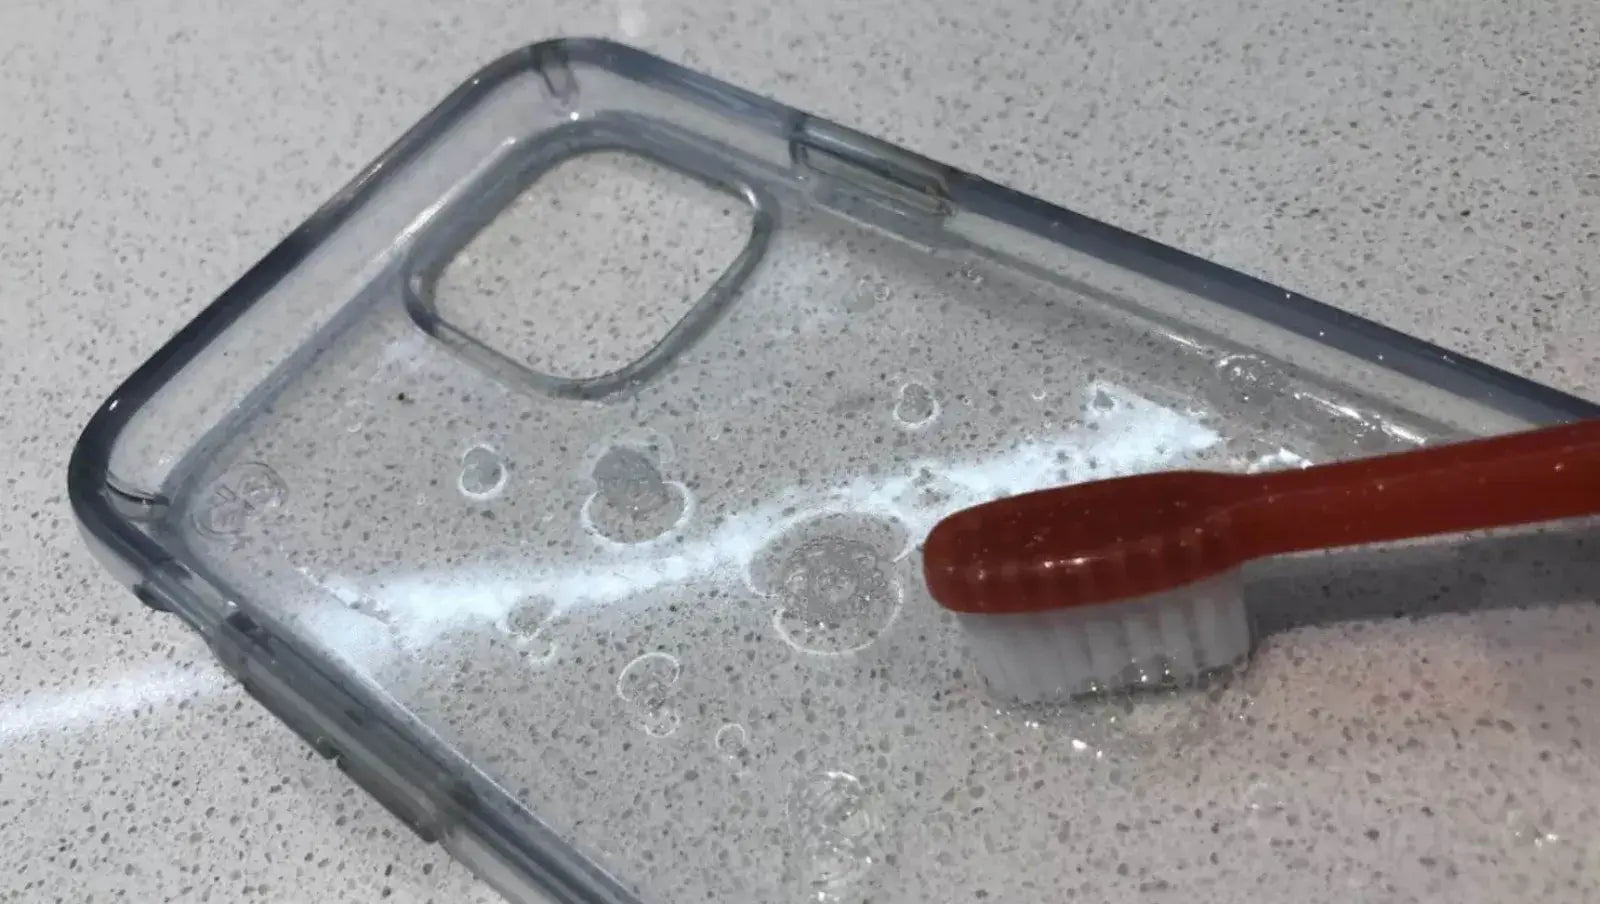 An Eco-friendly Solution For “How To Clean A Clear Phone Case”